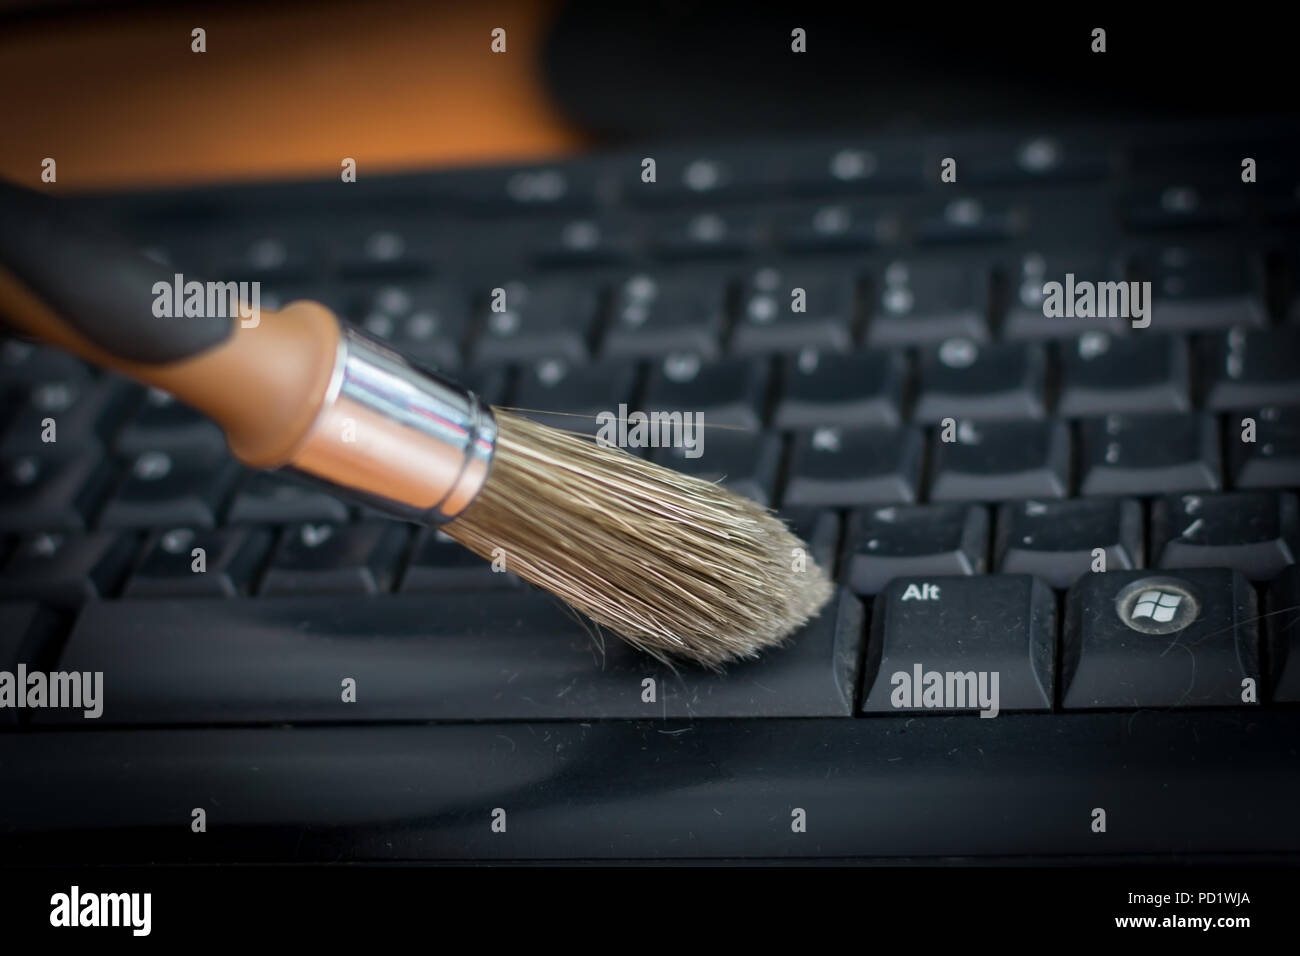 Cleaning keyboard from dust by black&brown brush. Cleaning concept. Office cleaning. Stock Photo